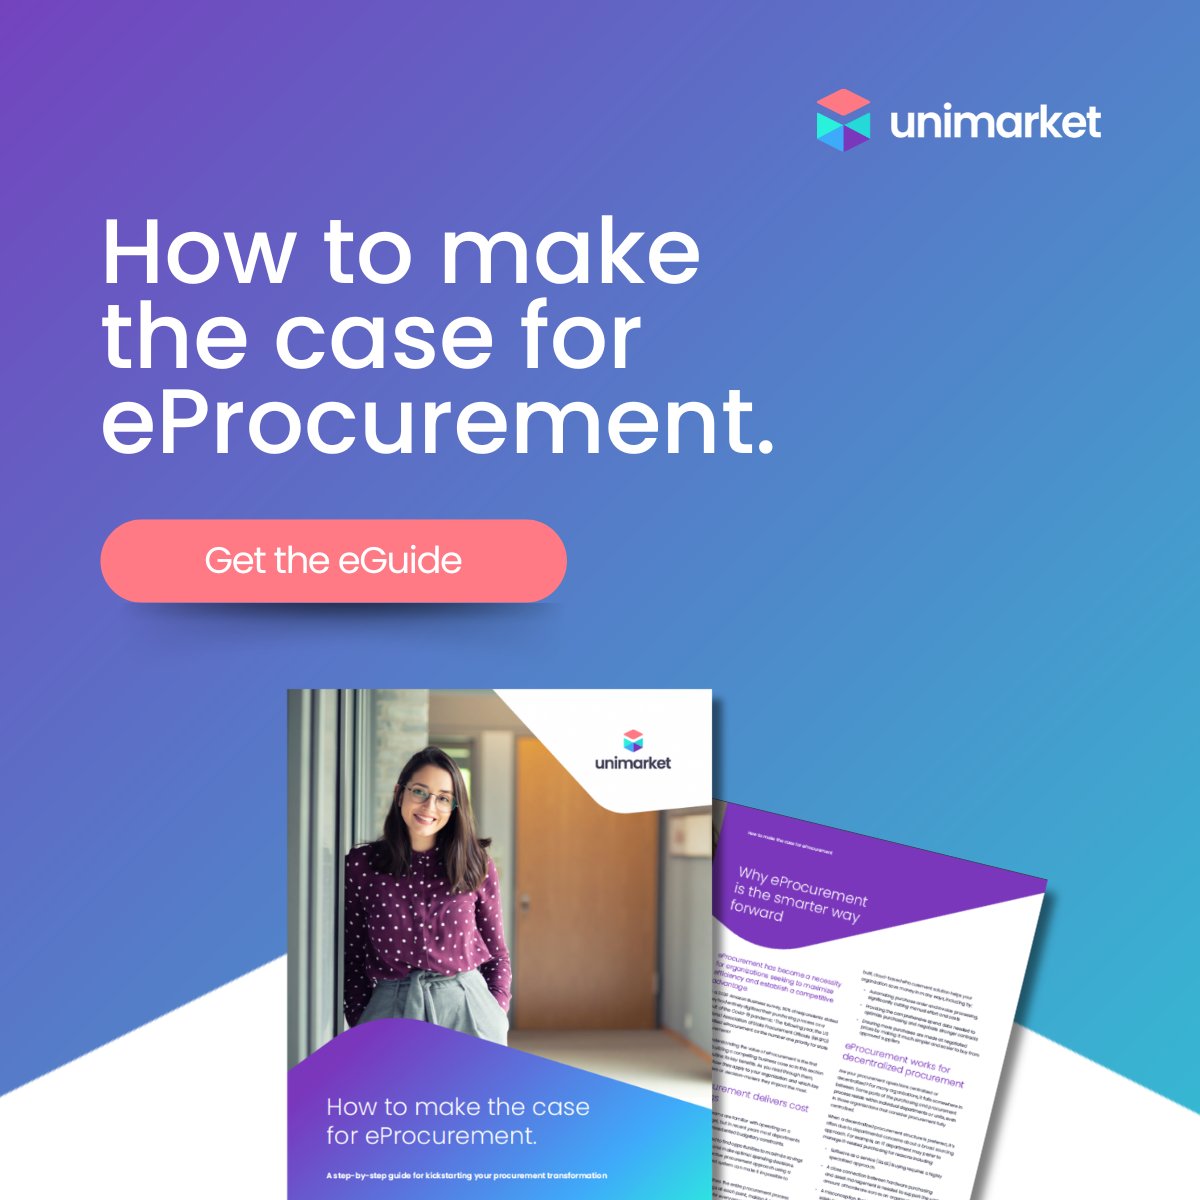 ⚡Ready to transform your spend management and procurement processes? First, you'll need to rally key stakeholders and get them on board. Download our new Guide, 'Make the Case for eProcurement,' today at hubs.li/Q02rJt4T0

#sourcetopay #eProcurement #spendmanagement